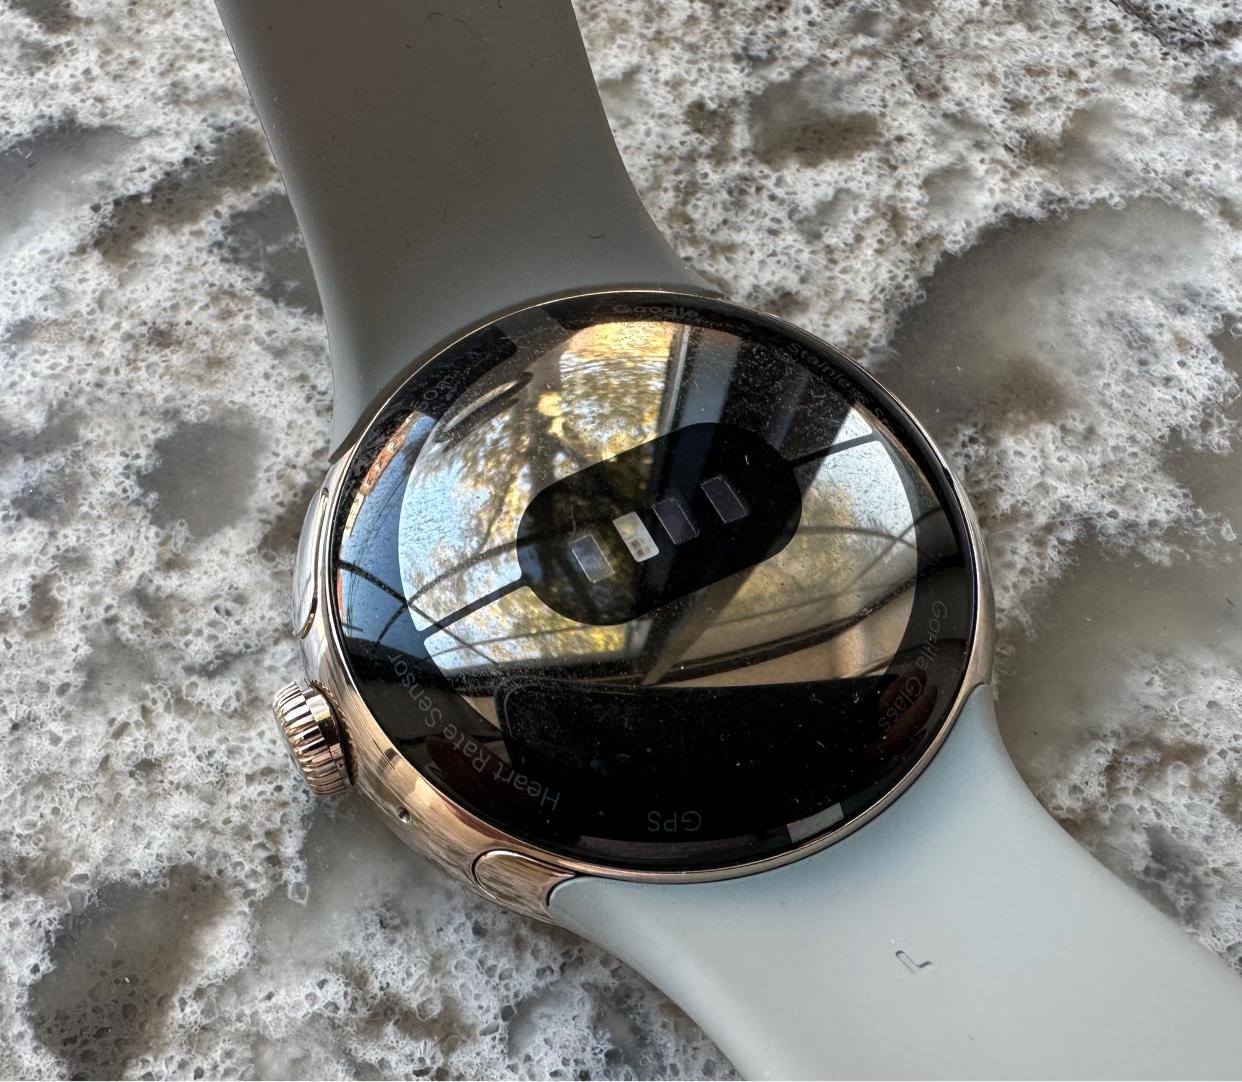 Like most modern smartwatches, the Pixel Watch has a suite of health sensors on its underside. (Image: Howley)